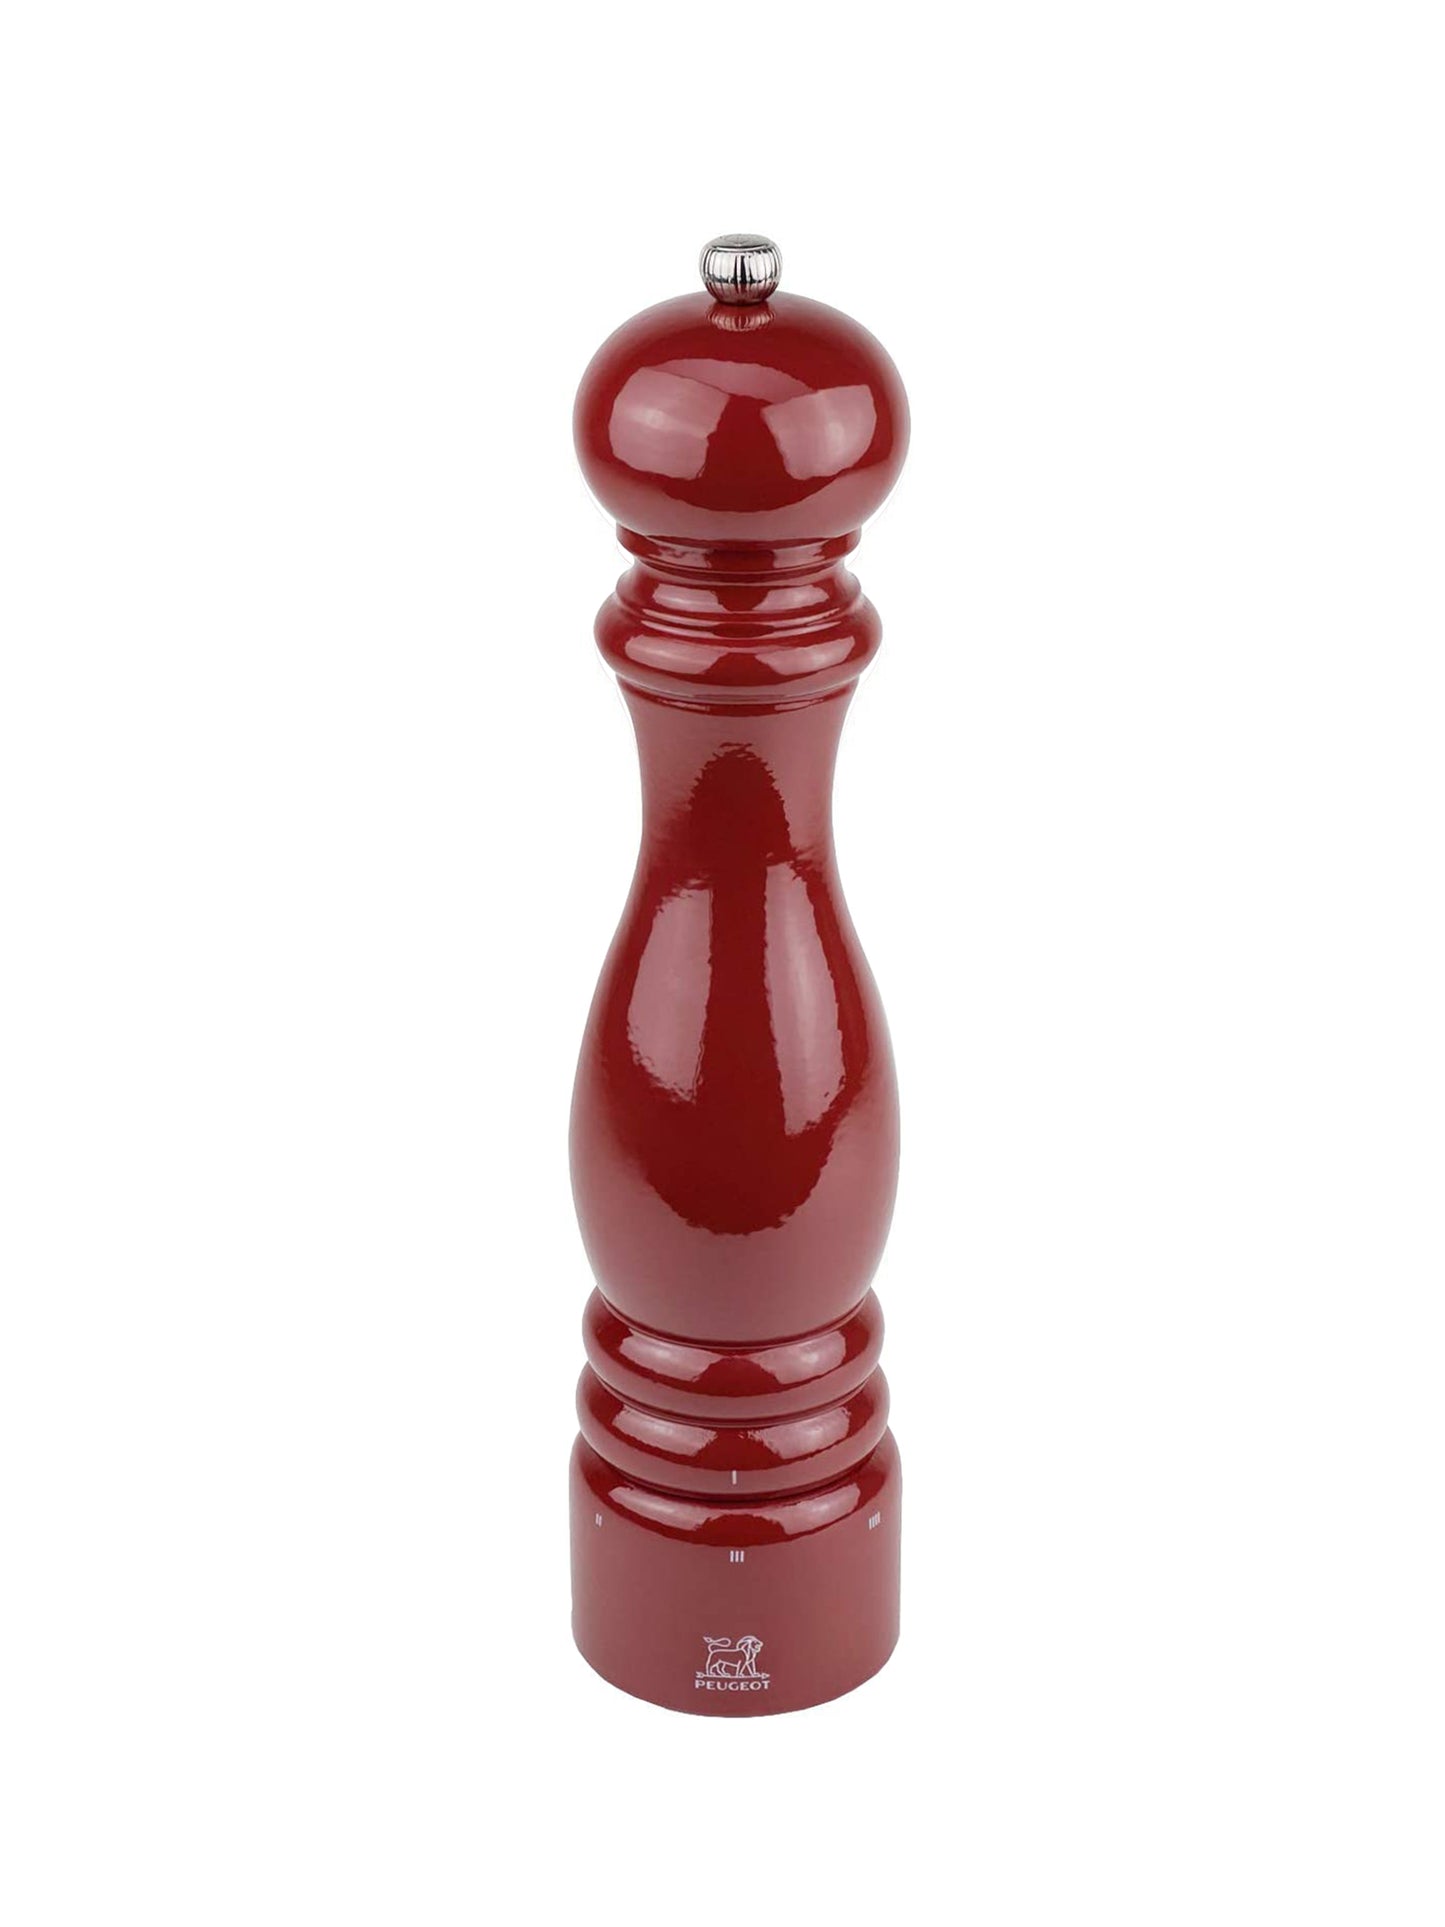 Peugeot Paris U'Select Red Lacquer Salt and Pepper Mills 12 Inch Weston Table